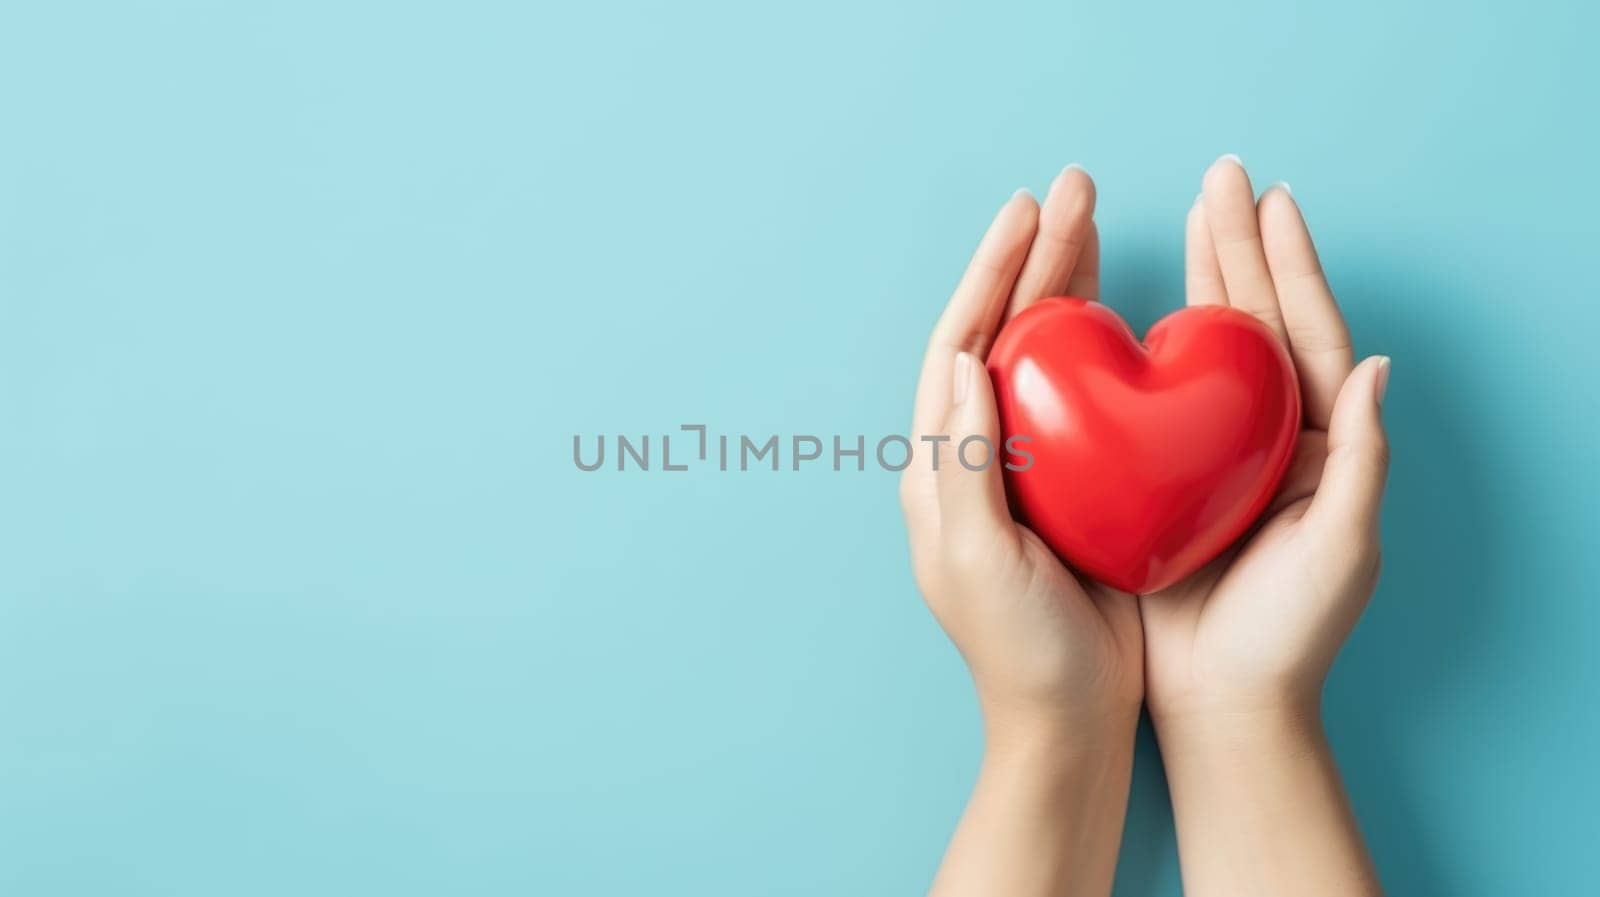 Hands holding red heart on blue background. St Valentine's Day vibe. by JuliaDorian